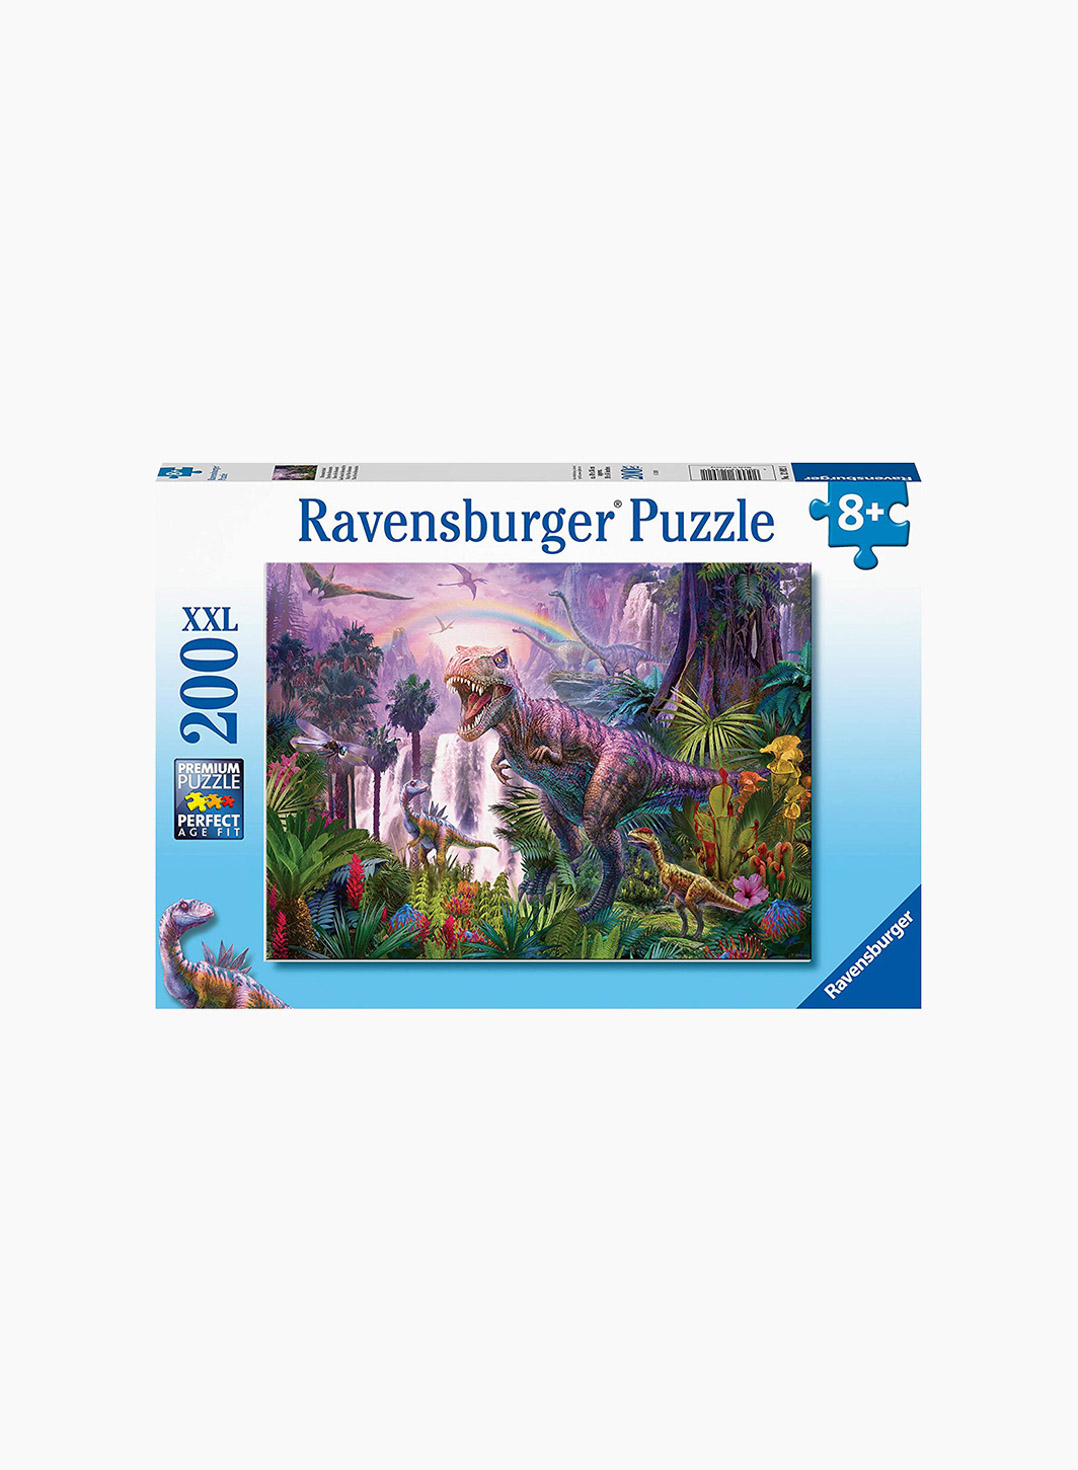 Ravensburger Puzzle King of the dinosaurs 200p